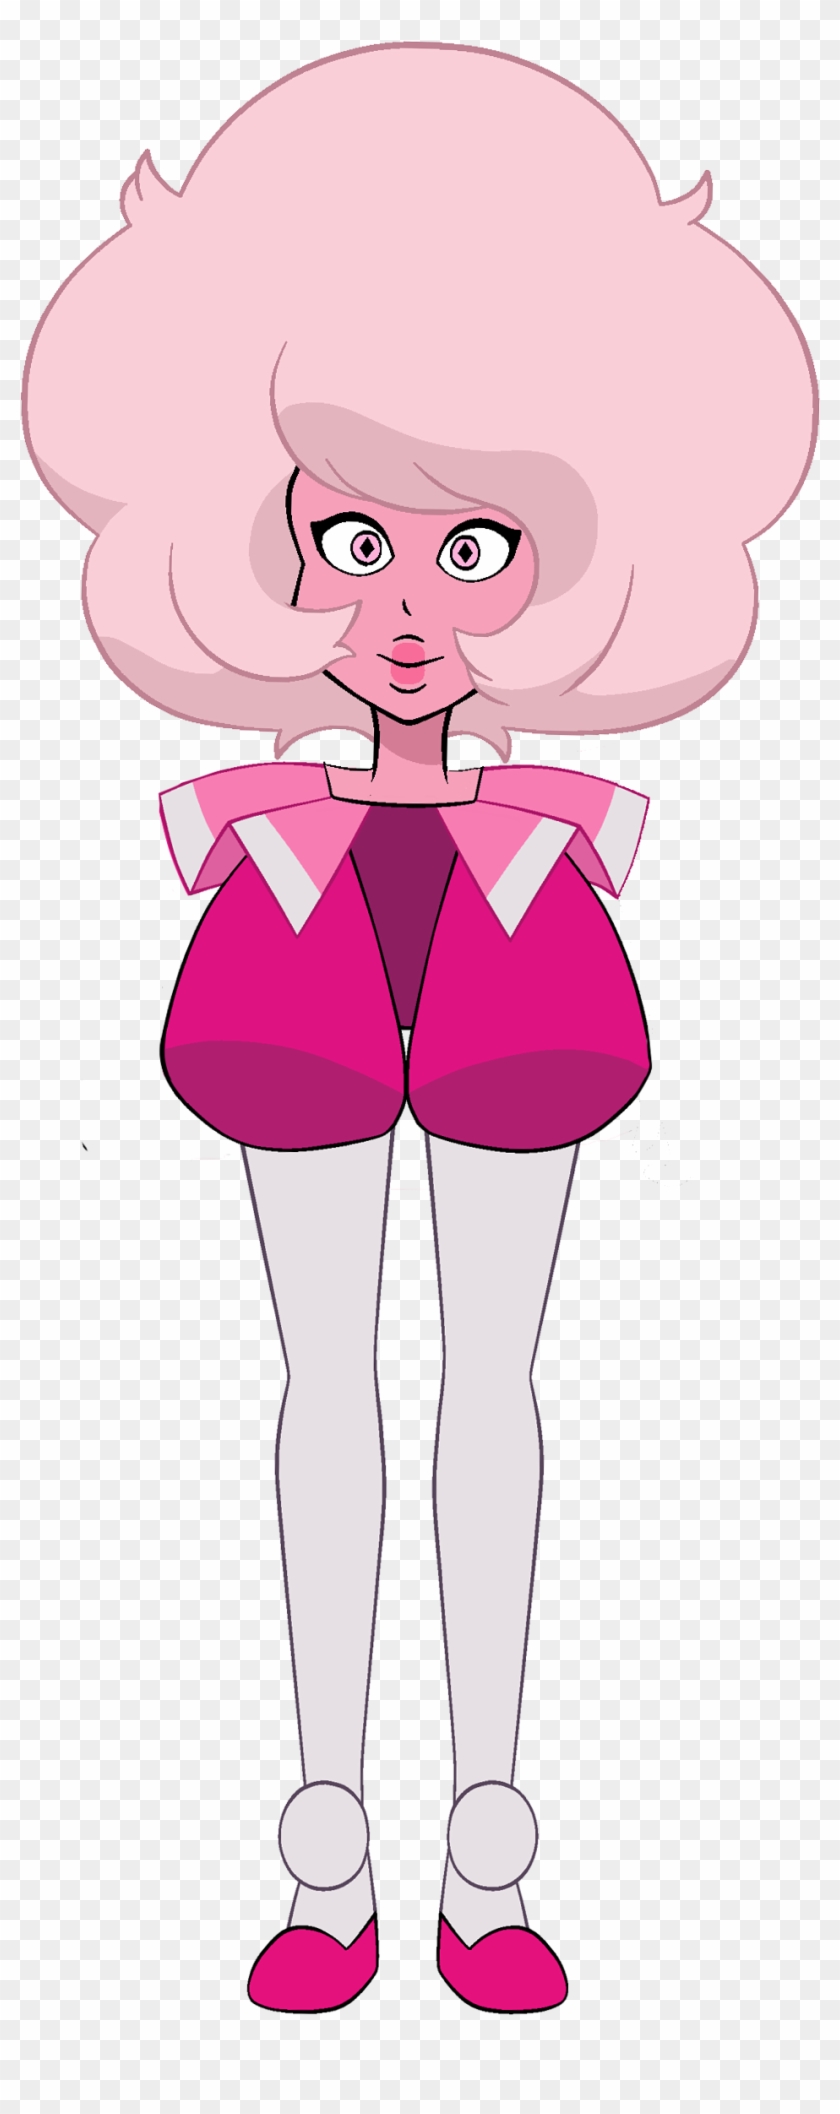 Otherintroducing Pink Diamond Lite - Steven Universe Pink Diamond Outfit Clipart